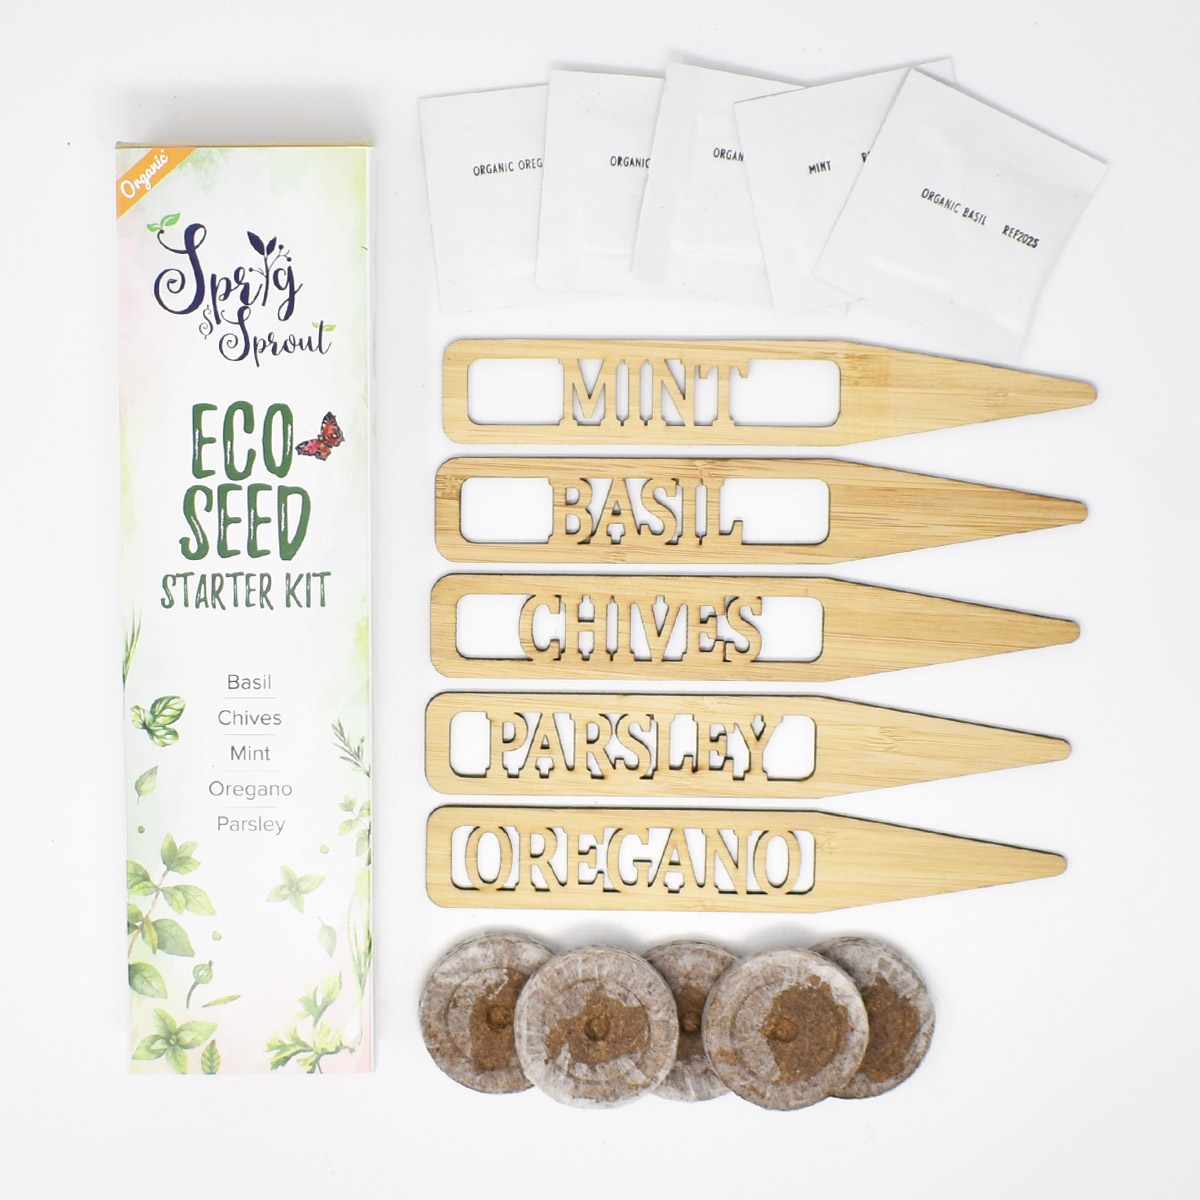 https://www.peacewiththewild.co.uk/wp-content/uploads/2020/09/sprig-sprout-seed-starter-kit.jpg